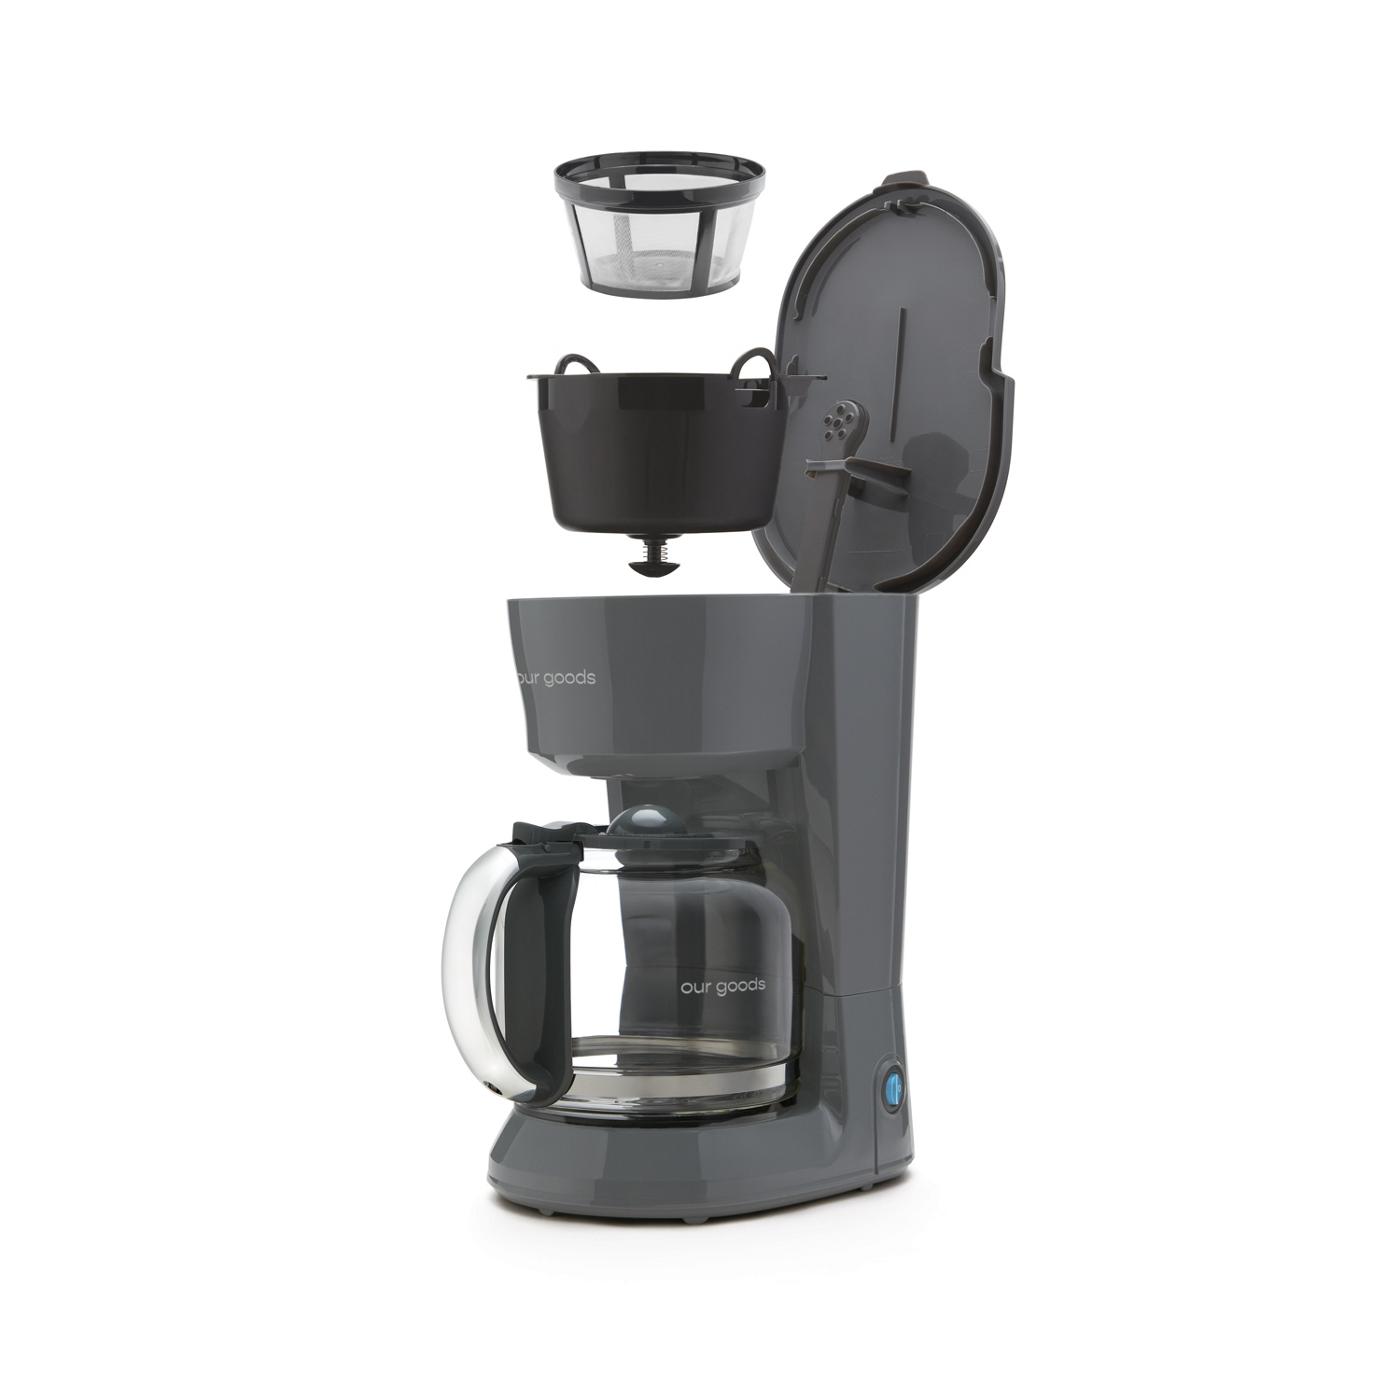 our goods Coffee Maker - Pebble Gray; image 2 of 3